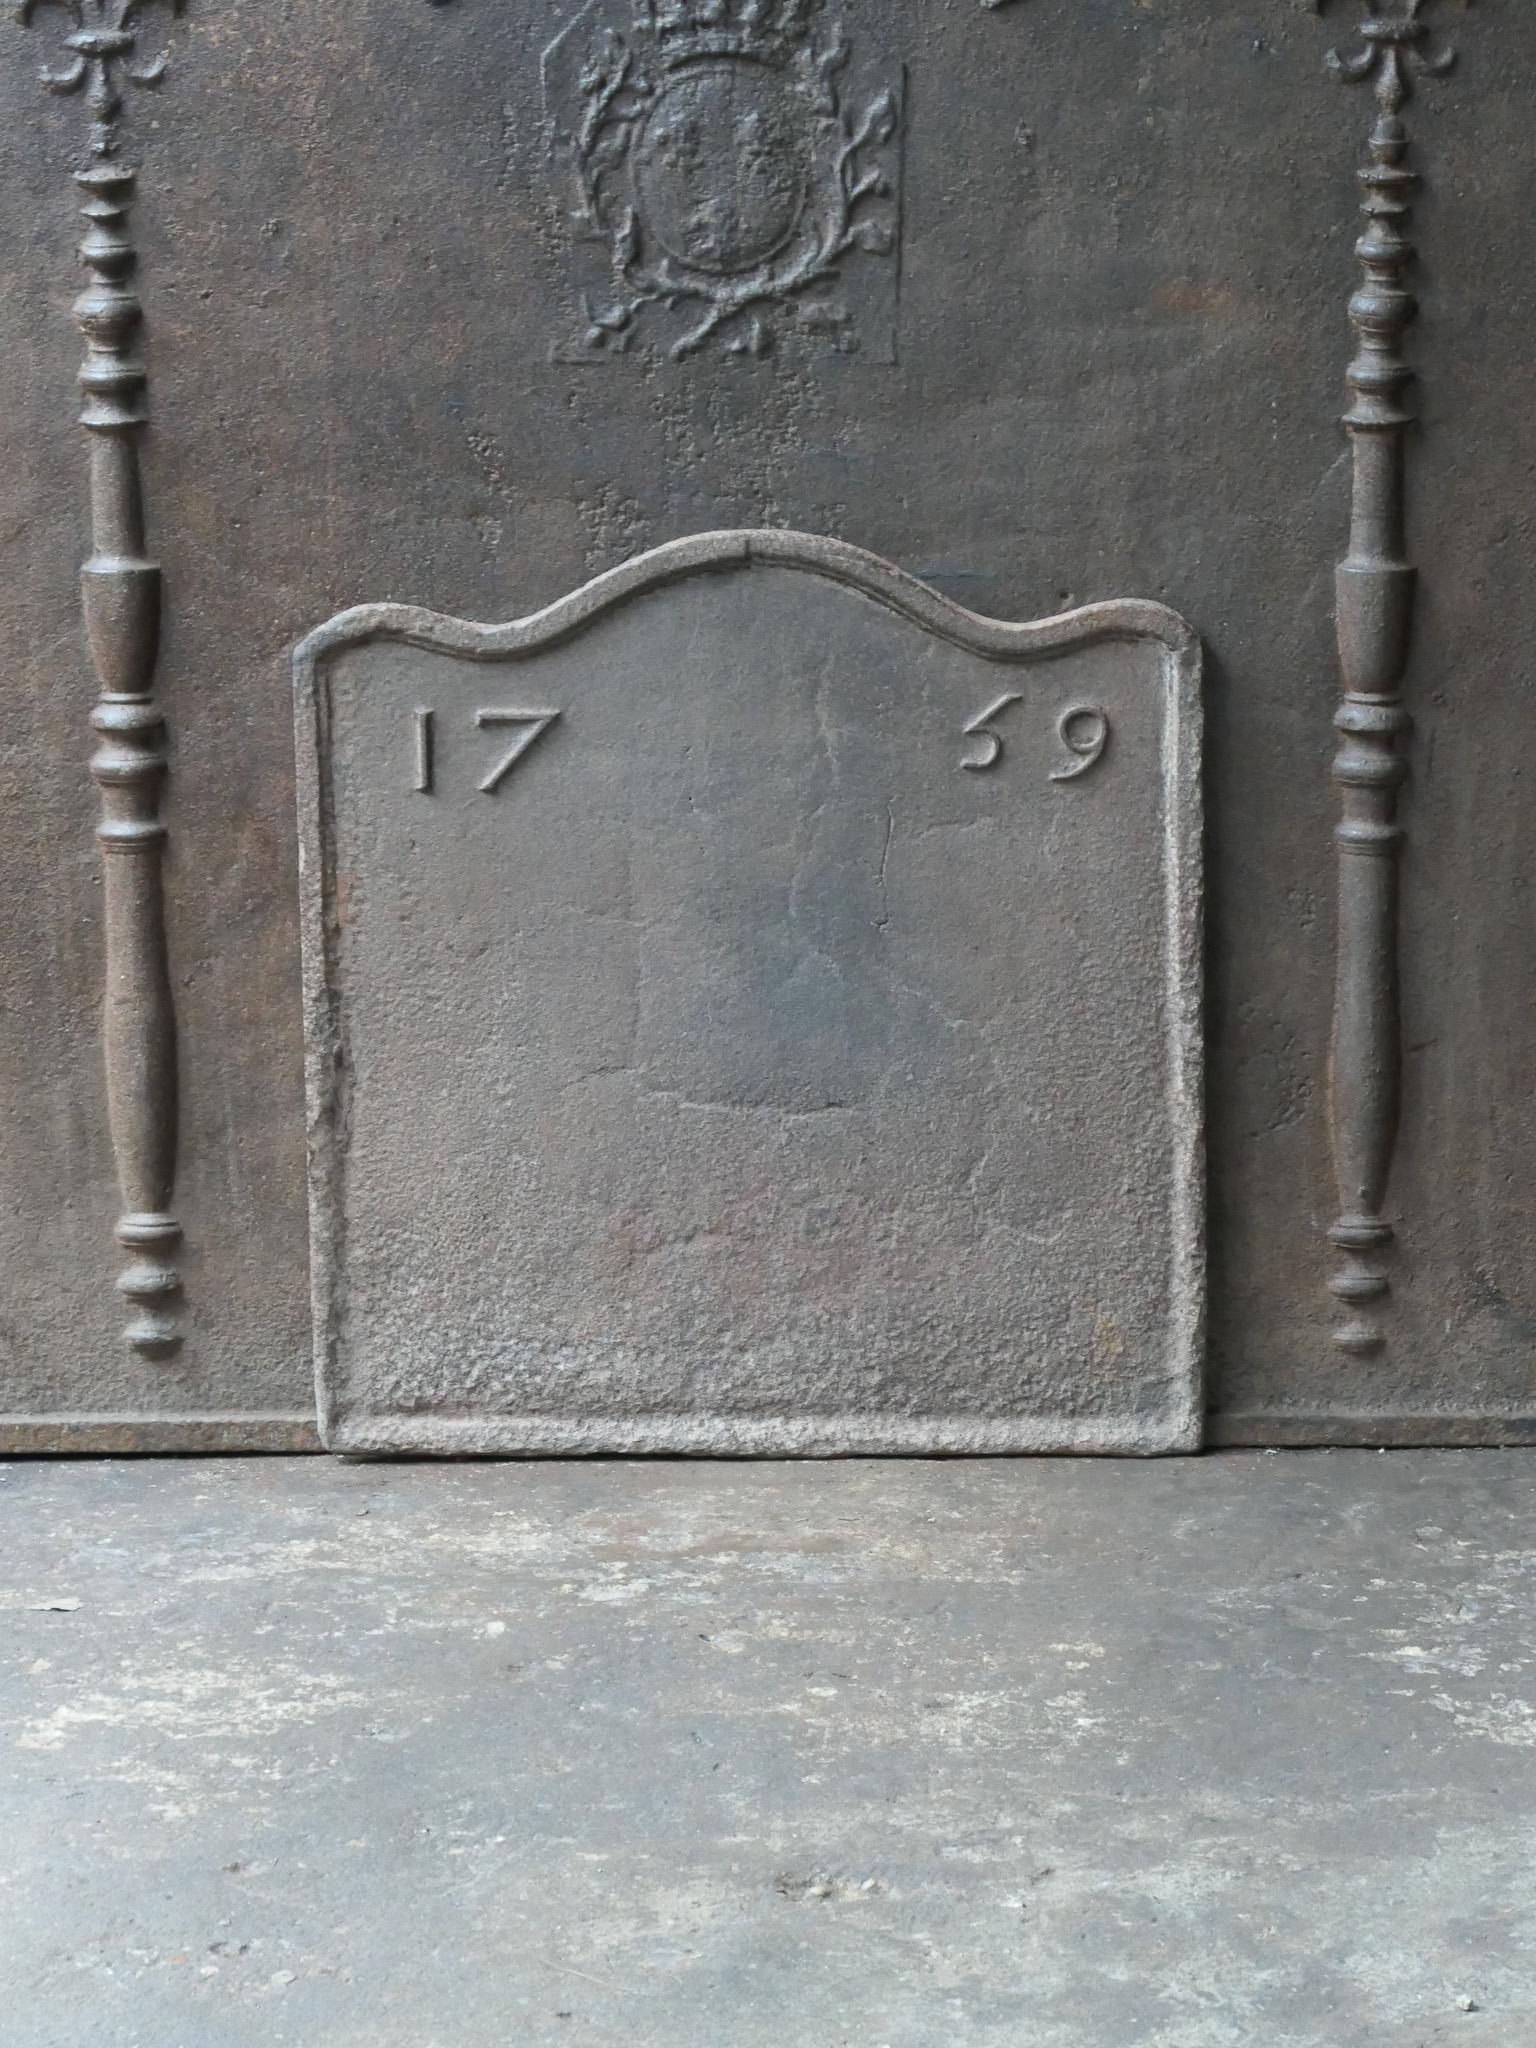 18th century French Louis XV period fireback. The date of production, 1759, is cast in the fireback.

The fireback has a natural brown patina. Upon request it can be made black / pewter colored at no extra cost. The fireback is in a good condition